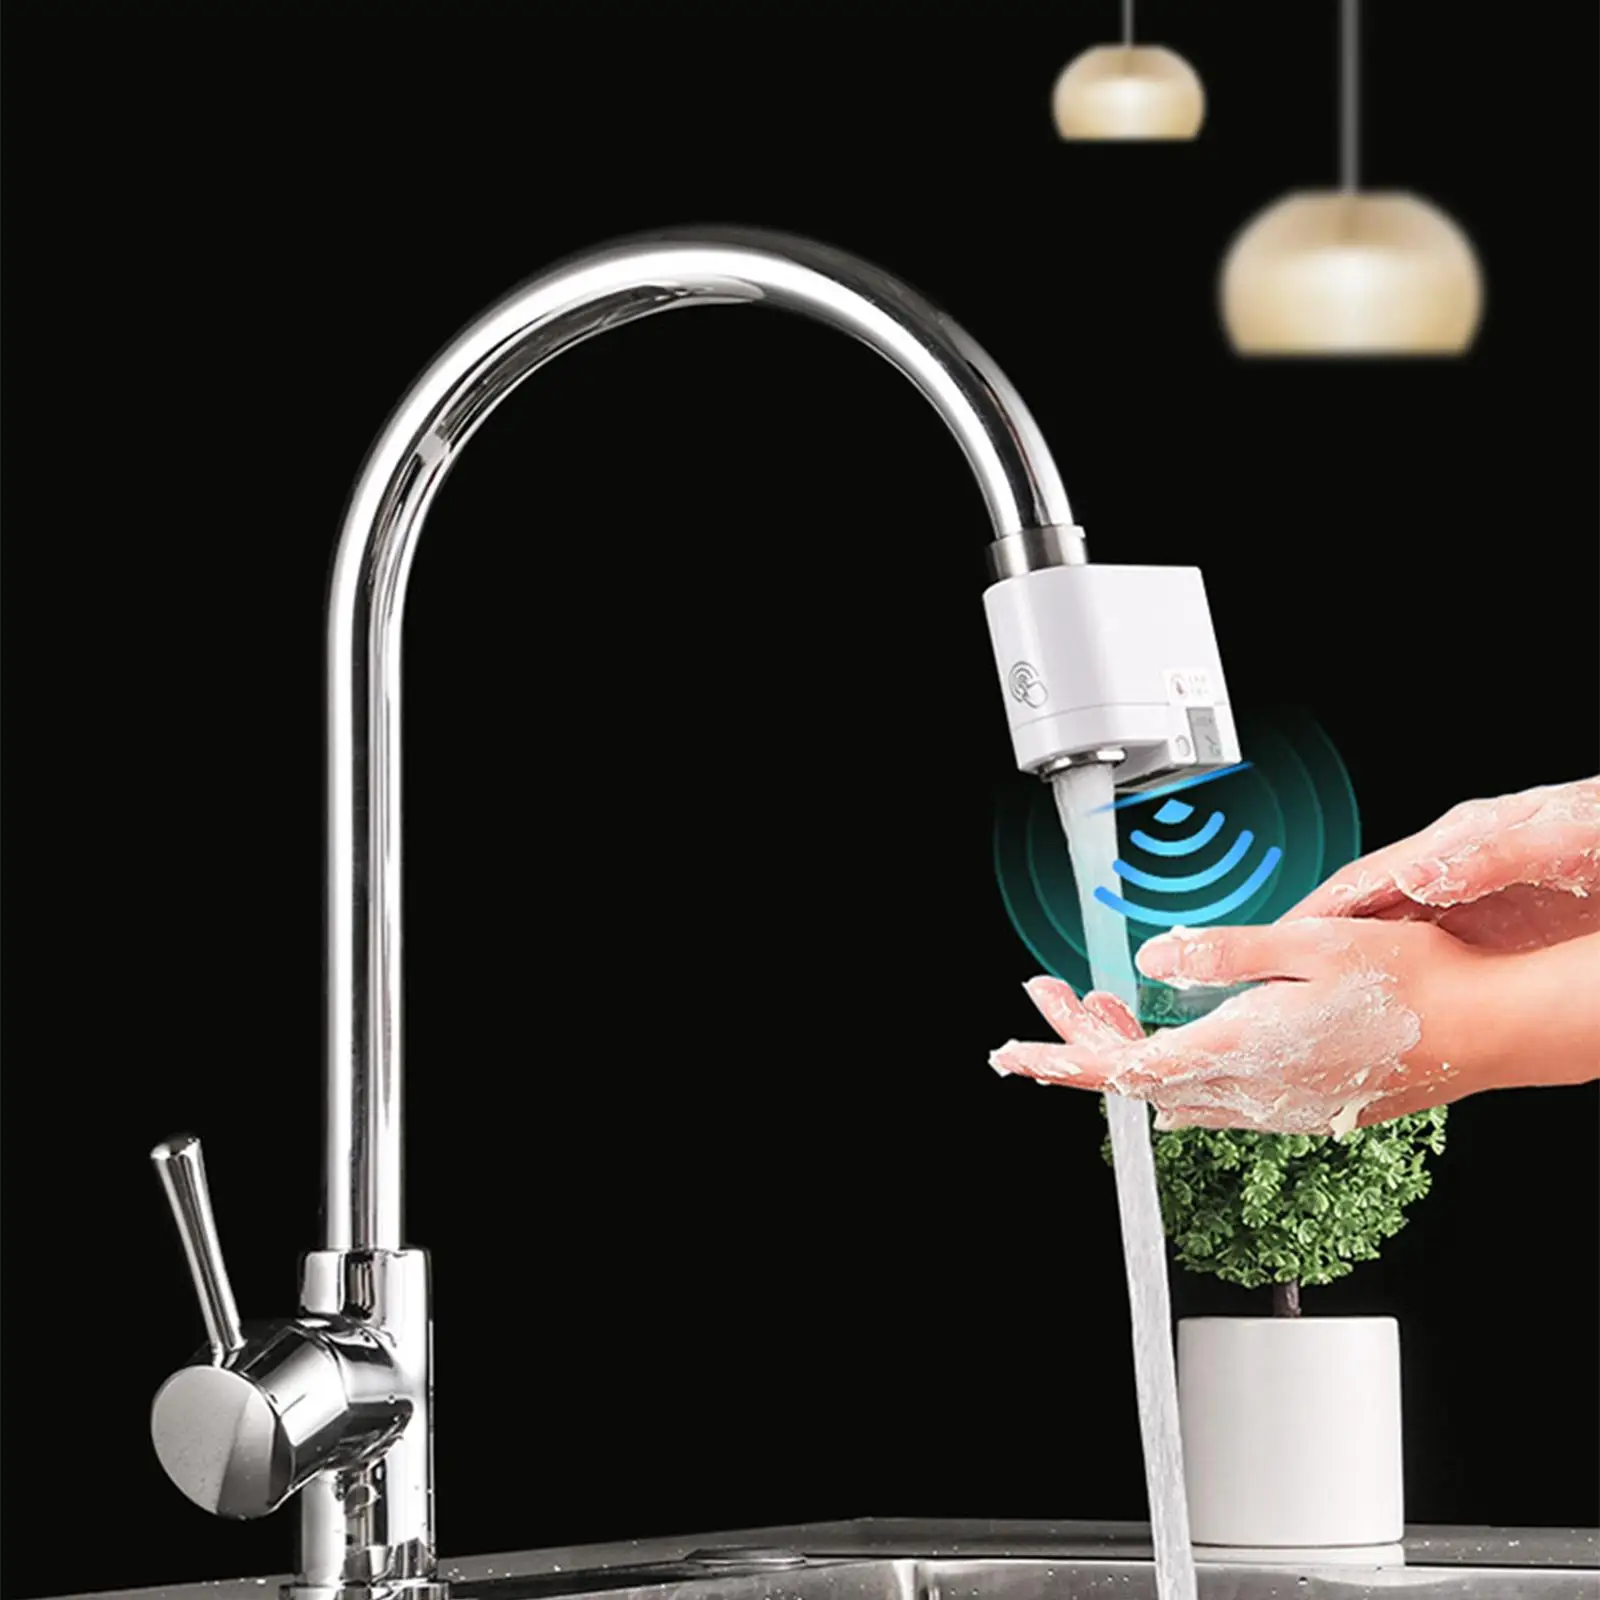 Water Faucet Motion Sensor Automatic Saver Tap Rechargeable Smart Touchless Water Energy Saving Faucet Adapter for Sink Bathroom